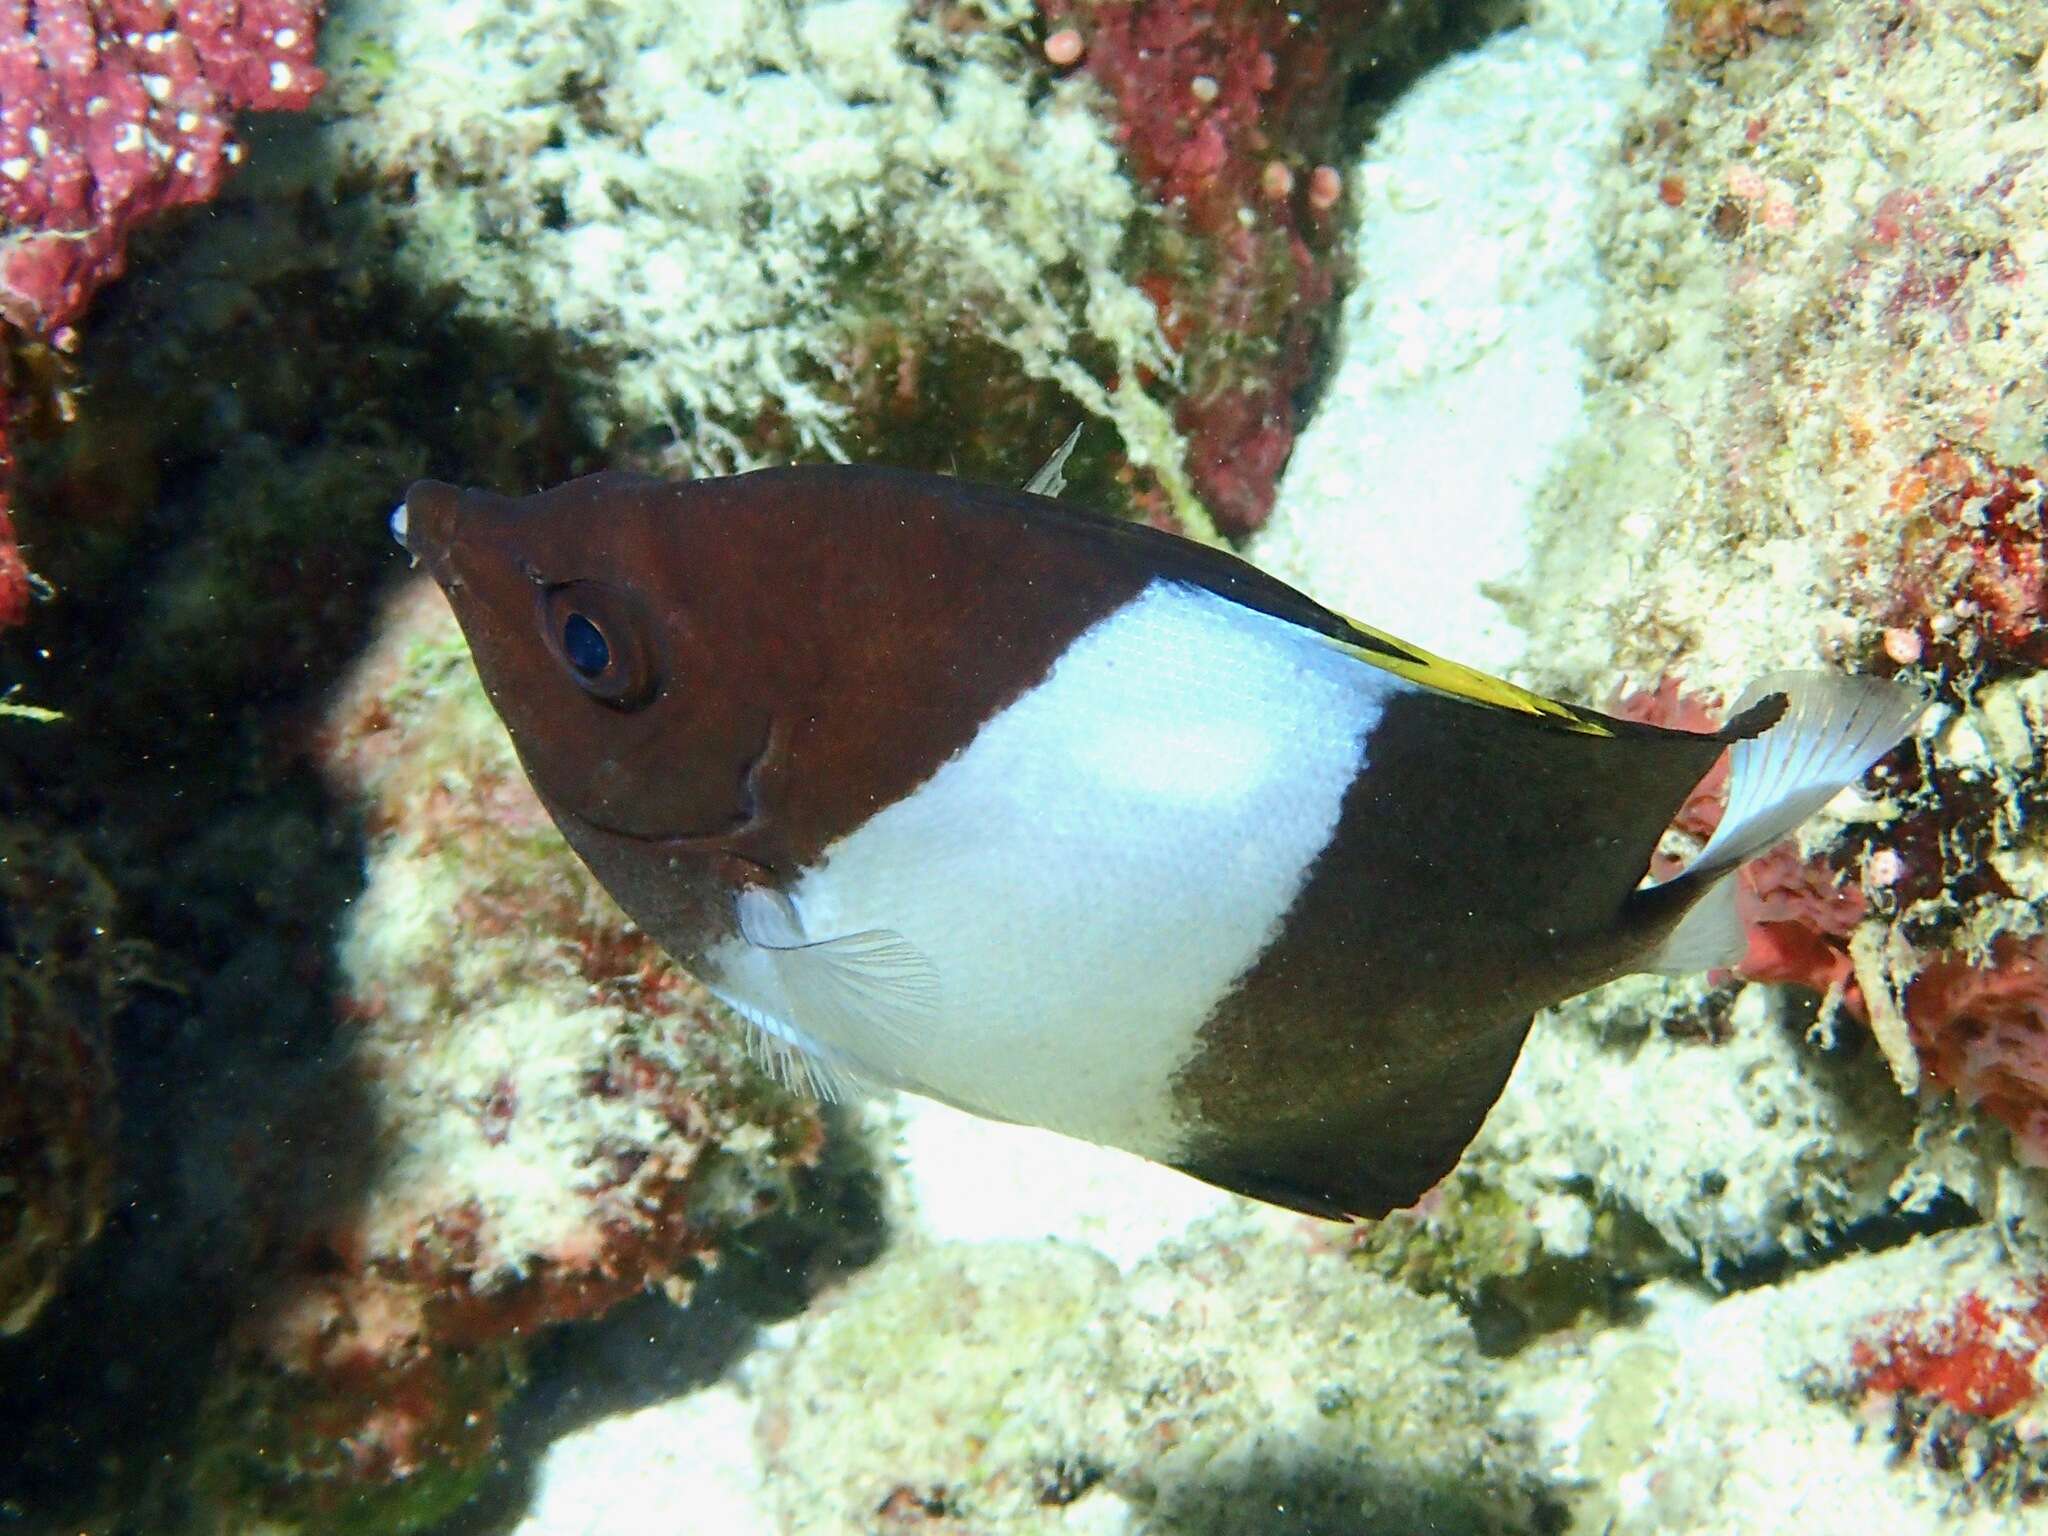 Image of Black Pyramid Butterflyfish